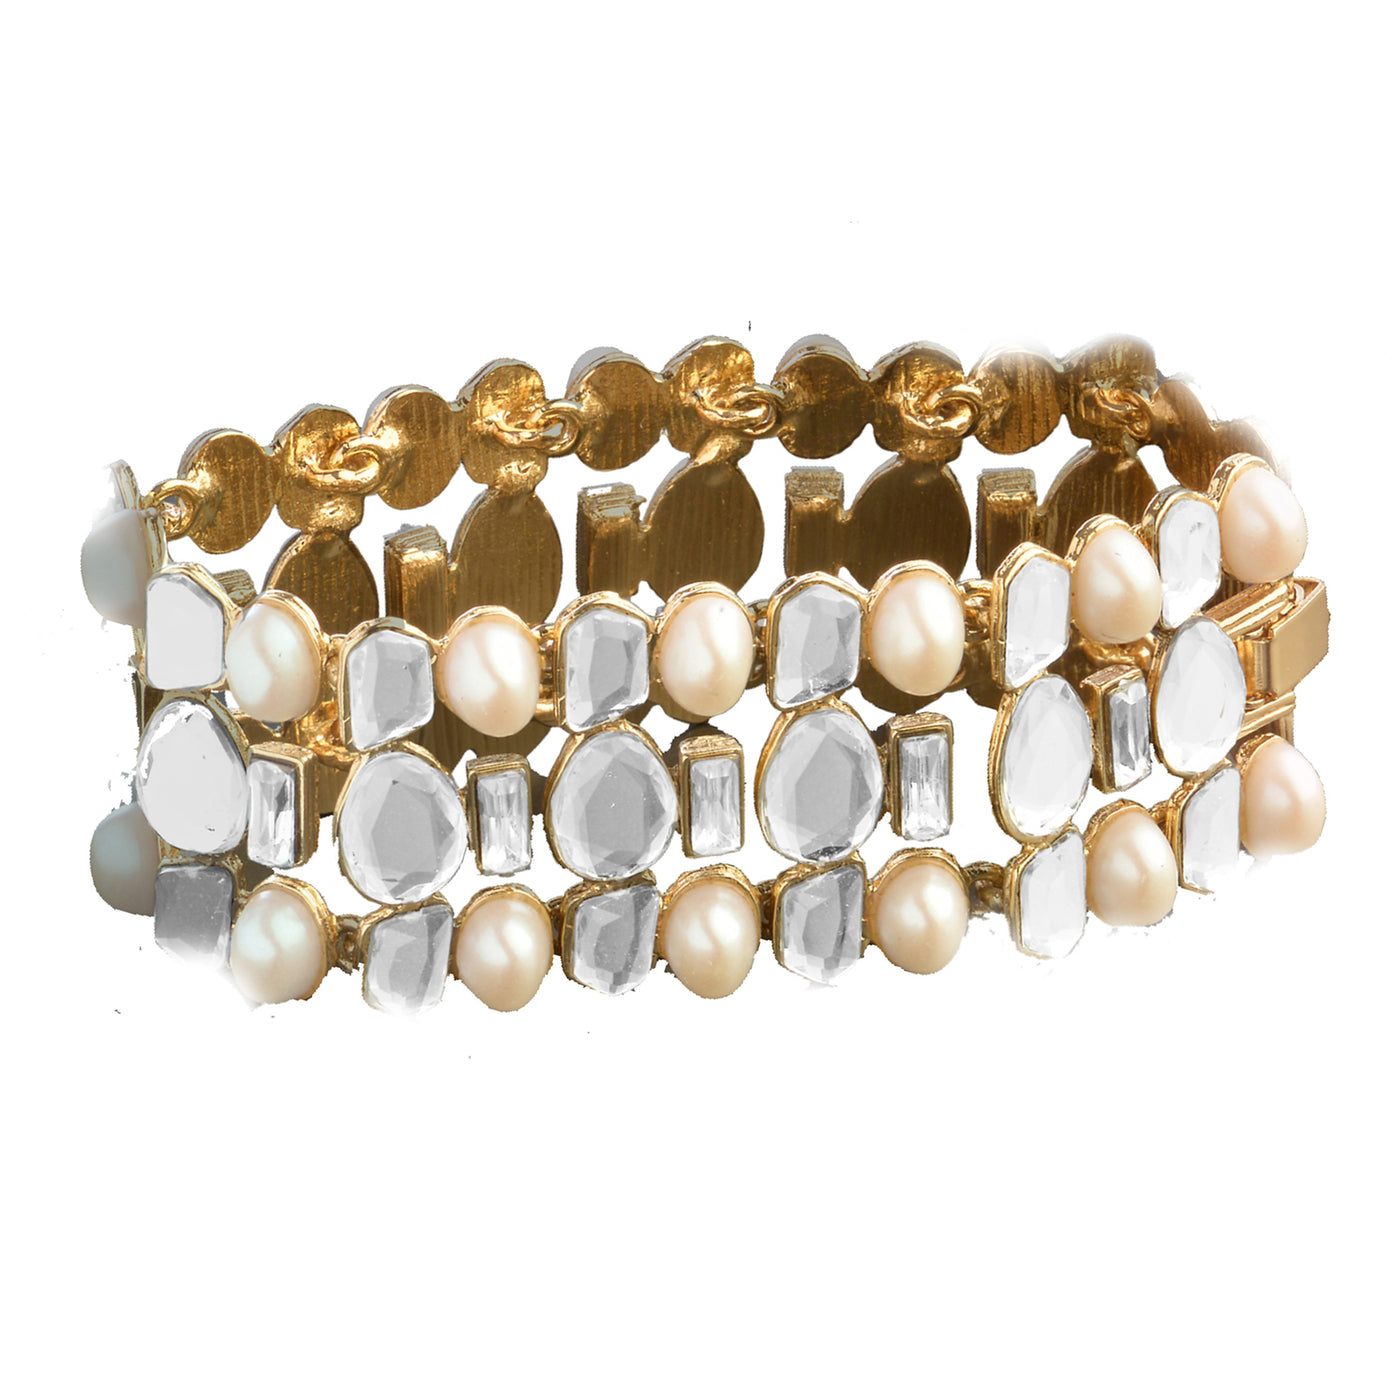 Aiyna Pearl and Speculum Statement Bracelet